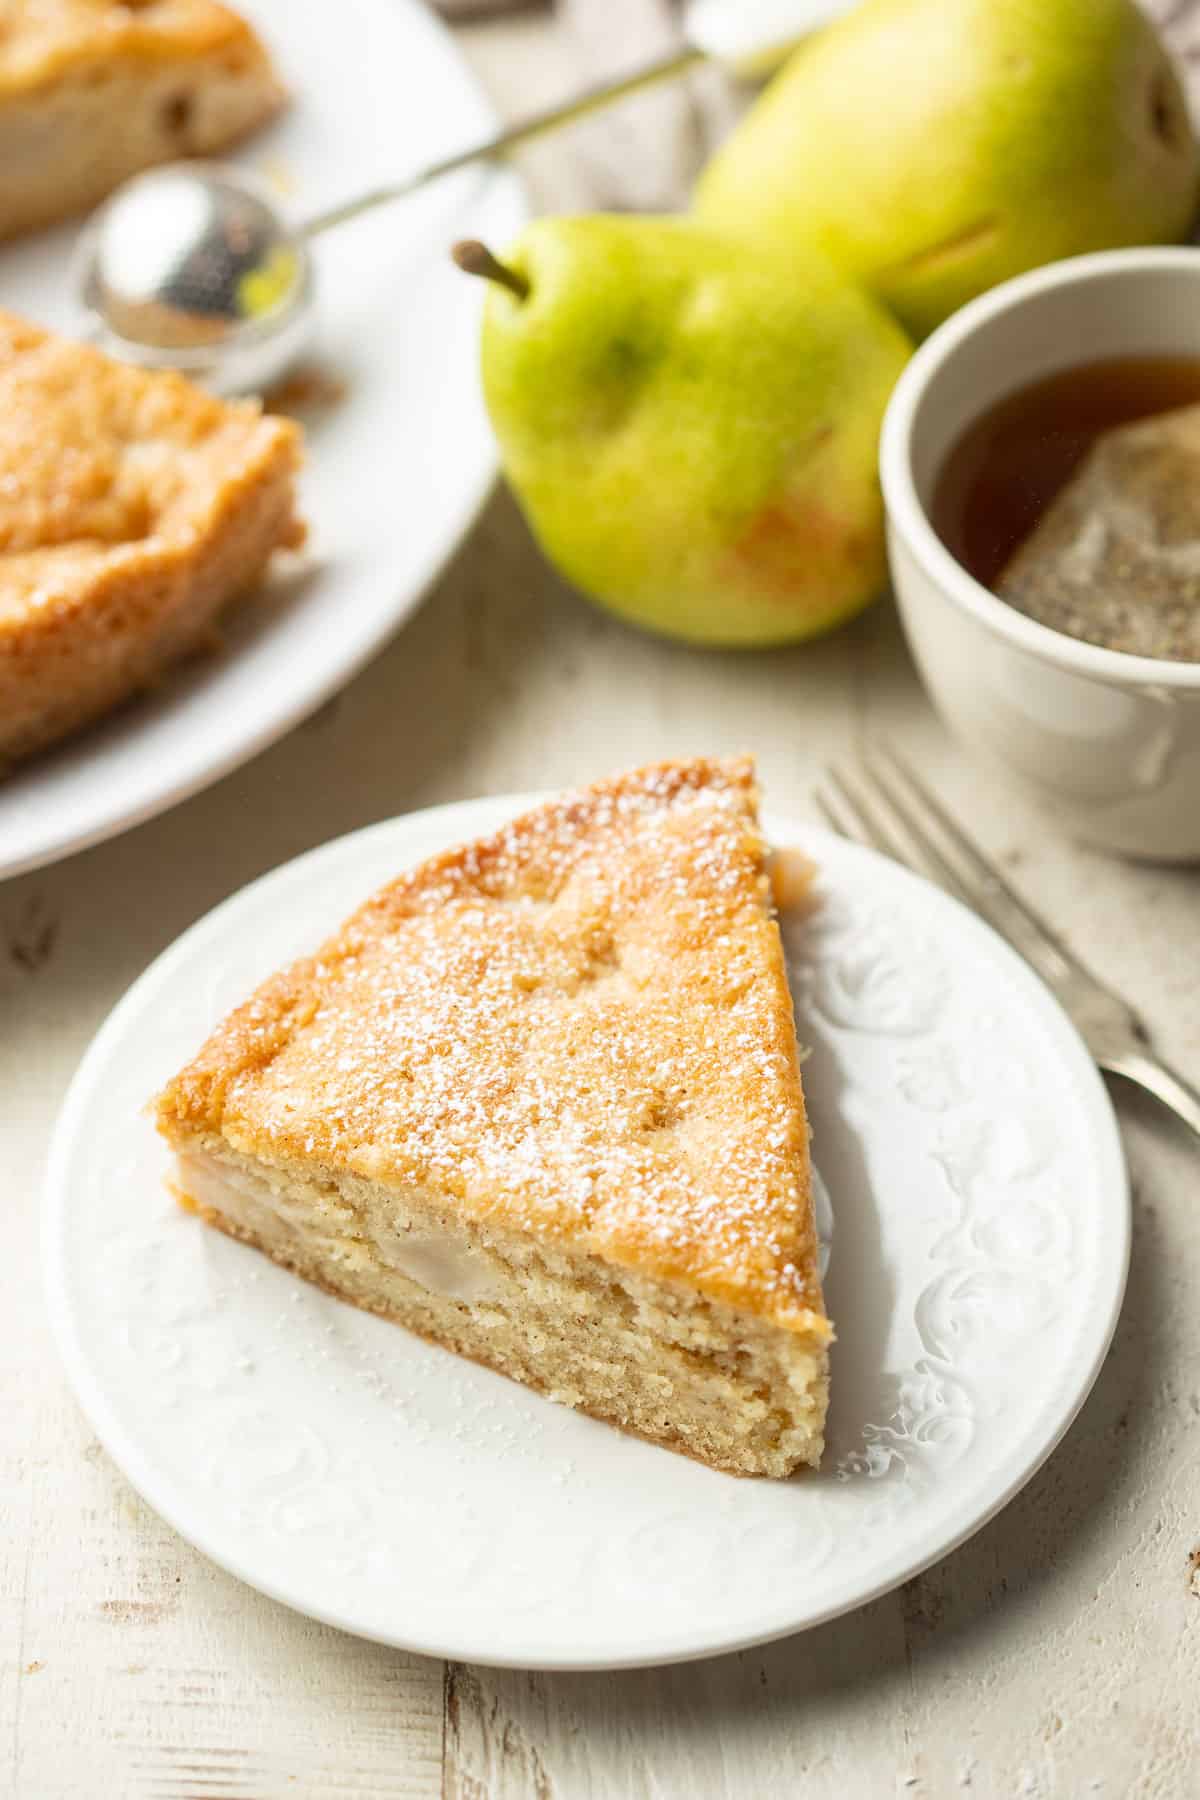 Slice of Vegan Pear Cake on a dish with tea cup and pears in the background.